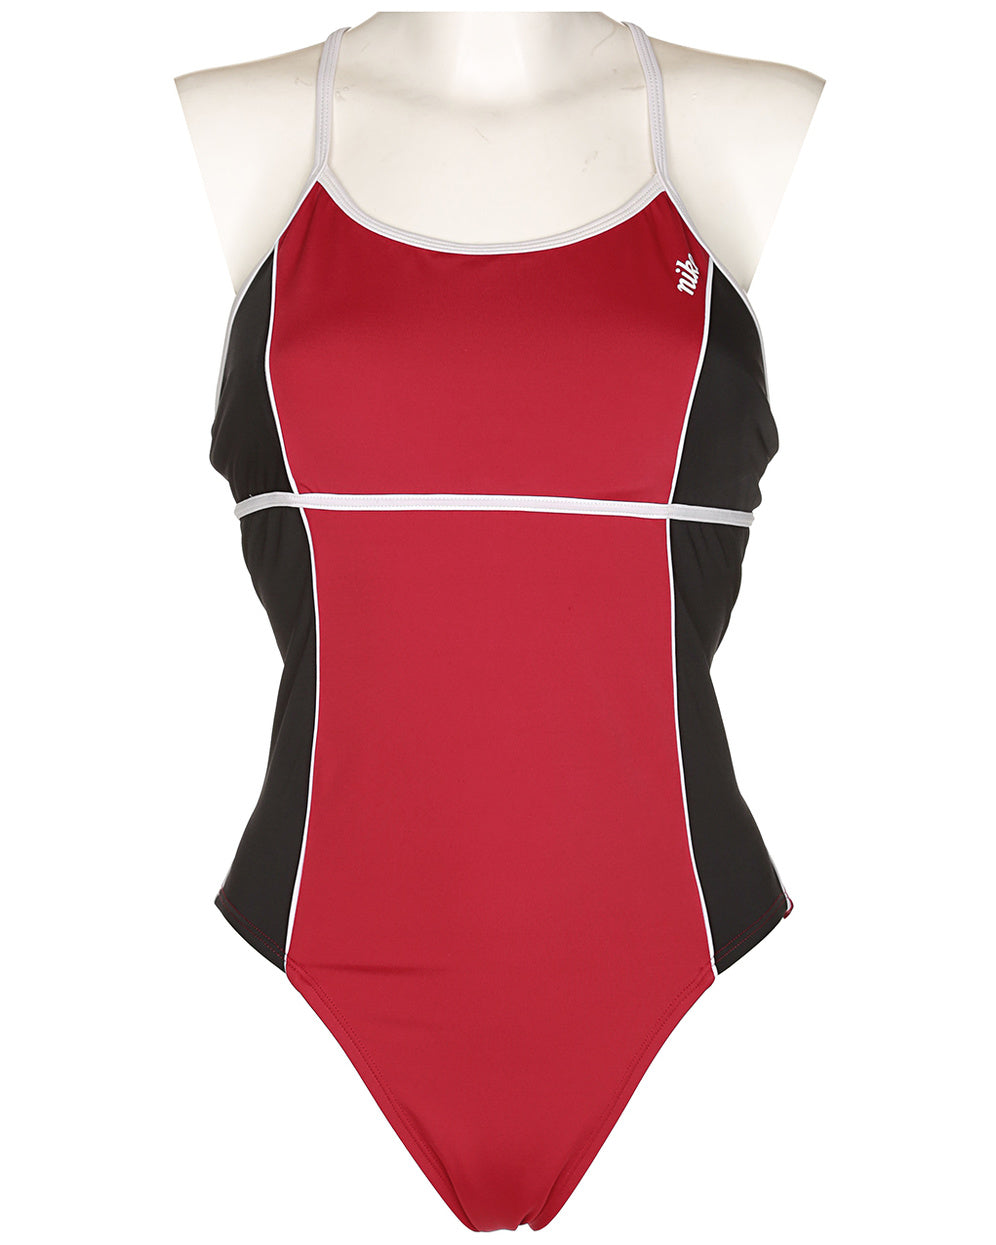 90s Nike Red & Black Swimsuit - M